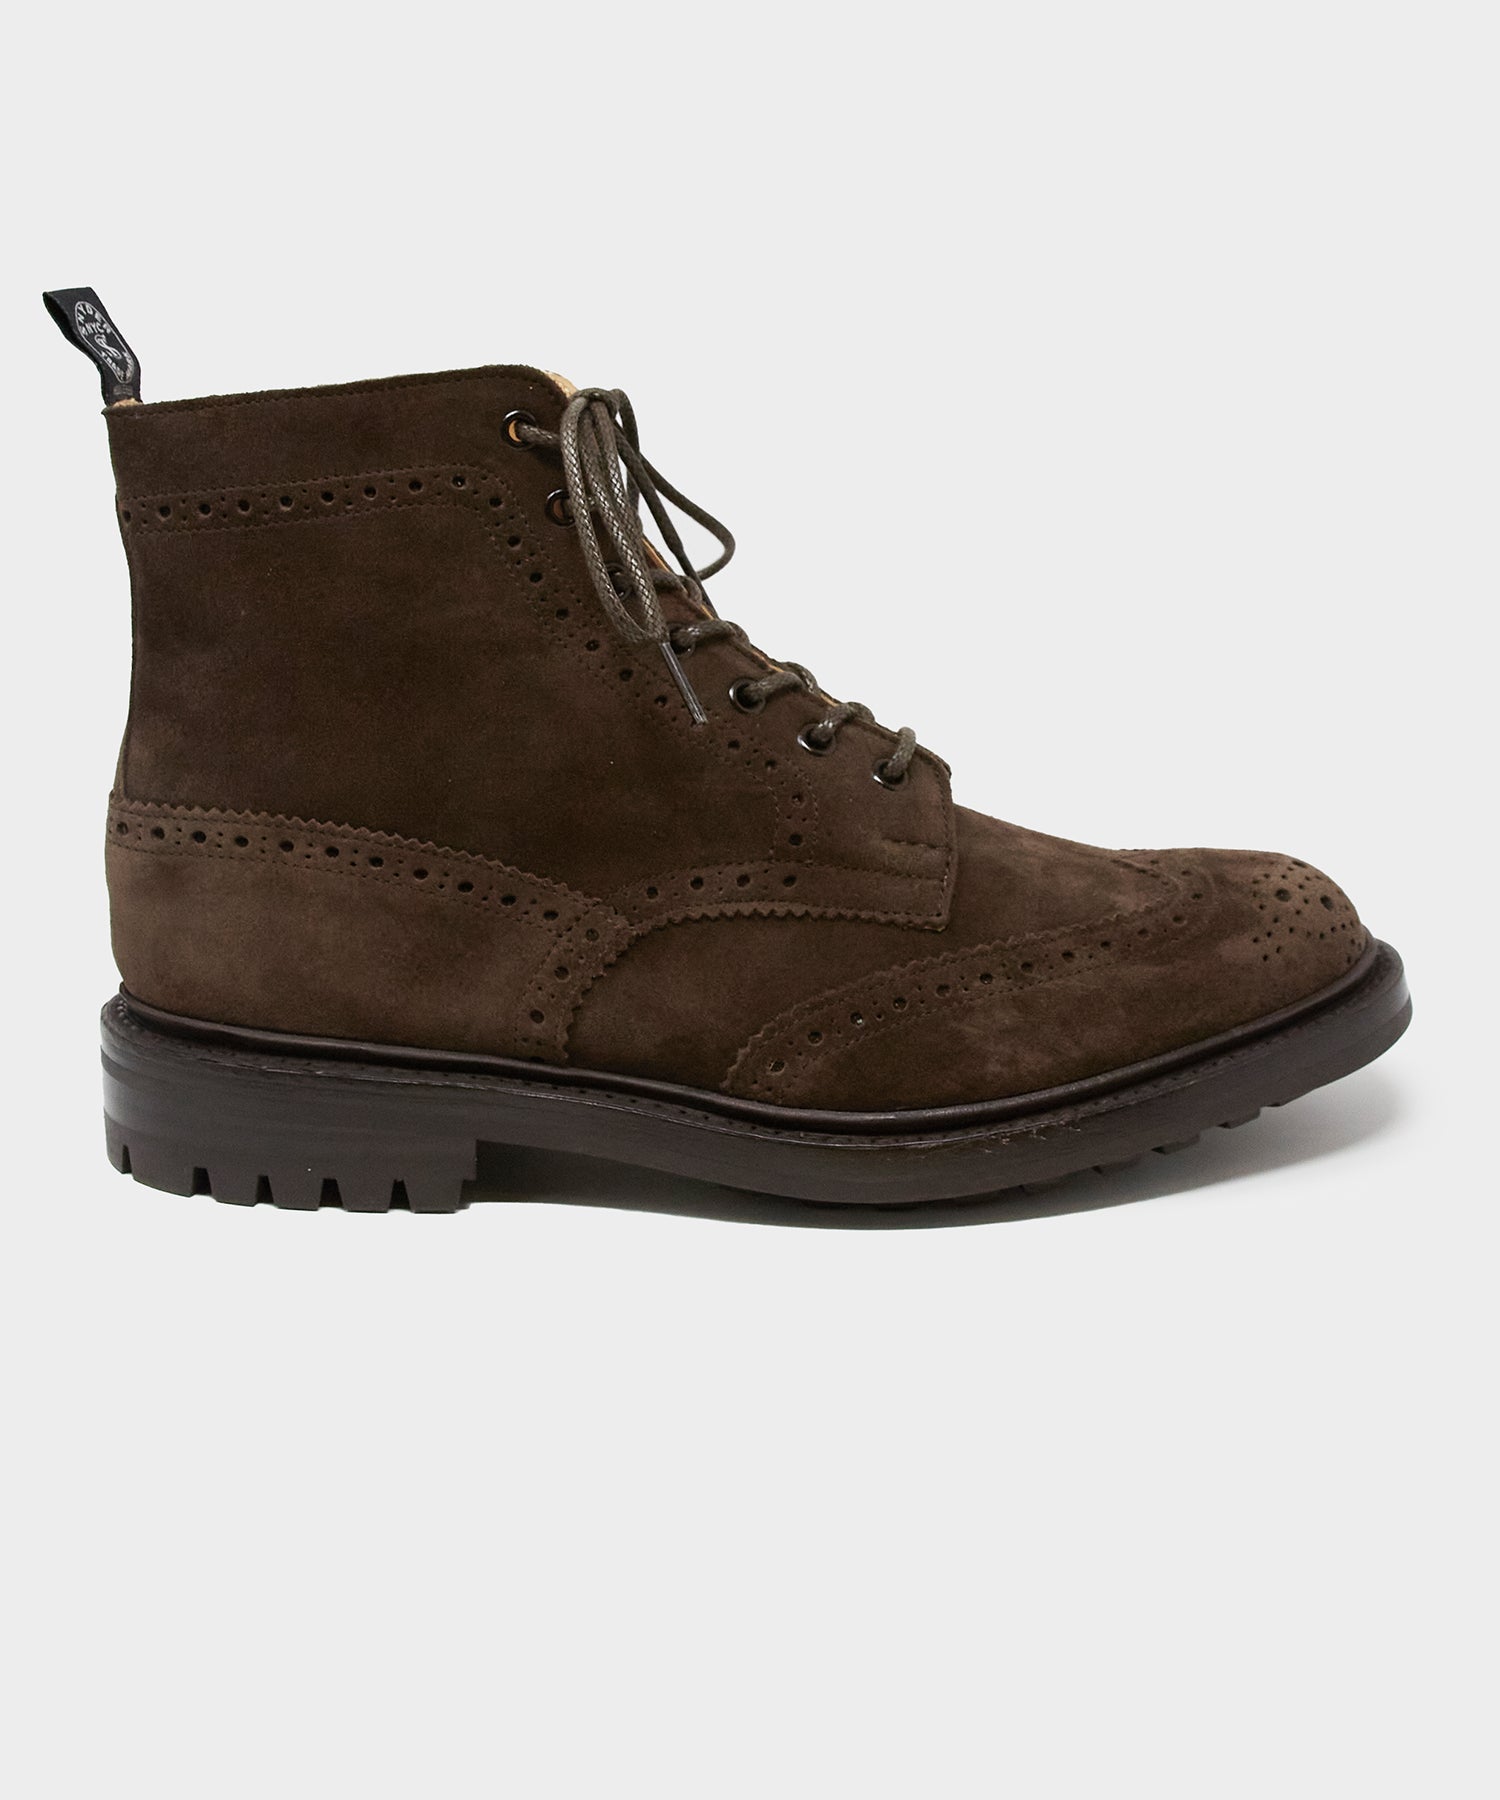 Todd Snyder x Tricker's Suede Stow Boot In Cafe